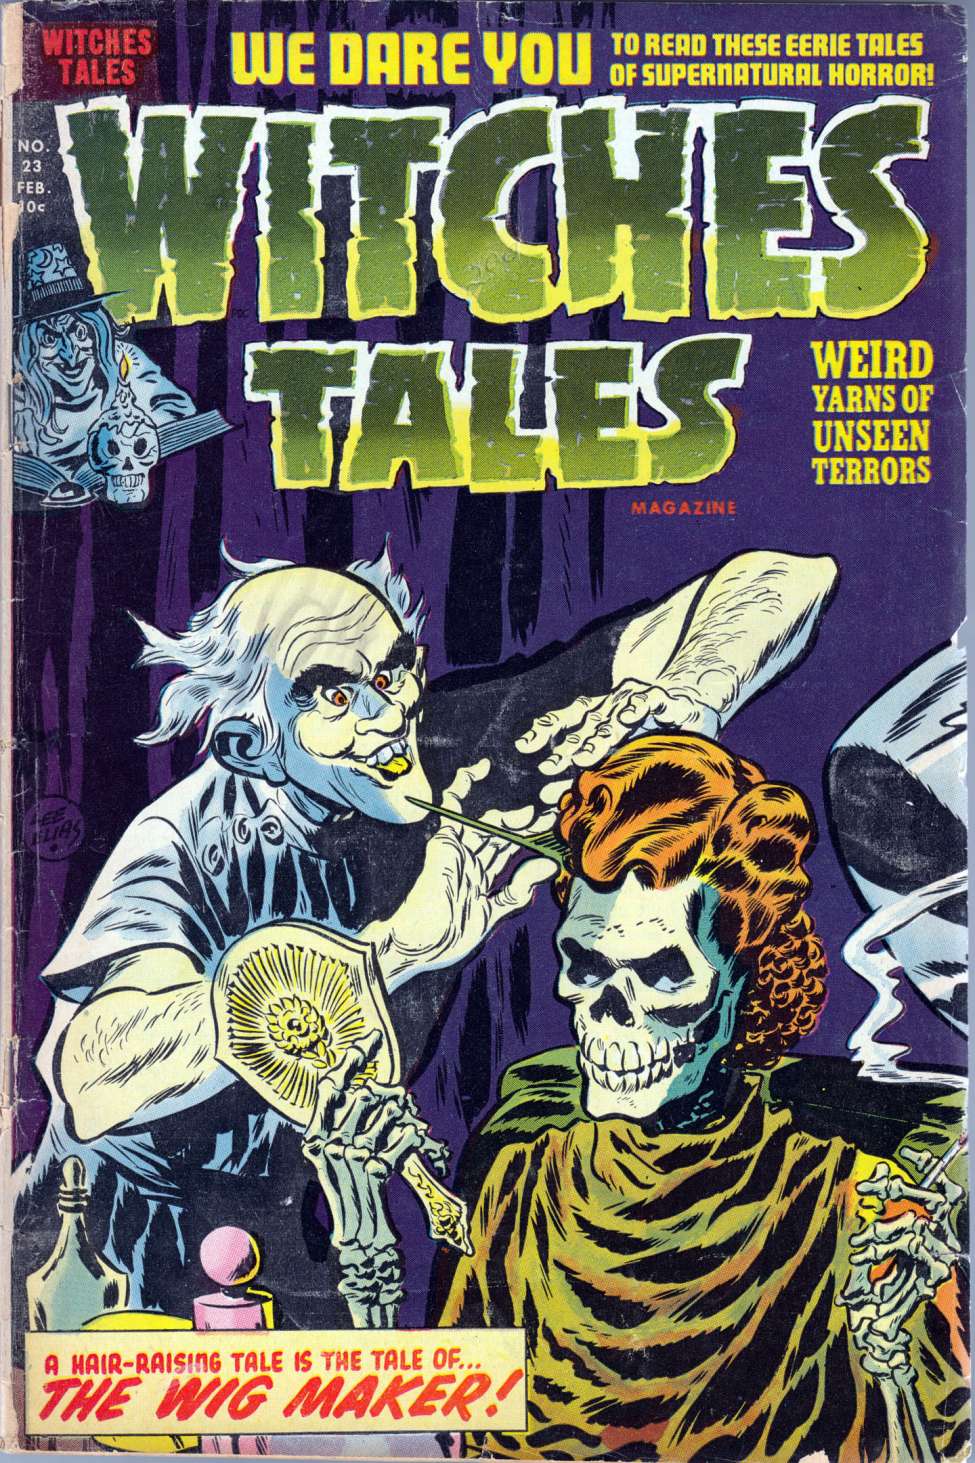 Book Cover For Witches Tales 23